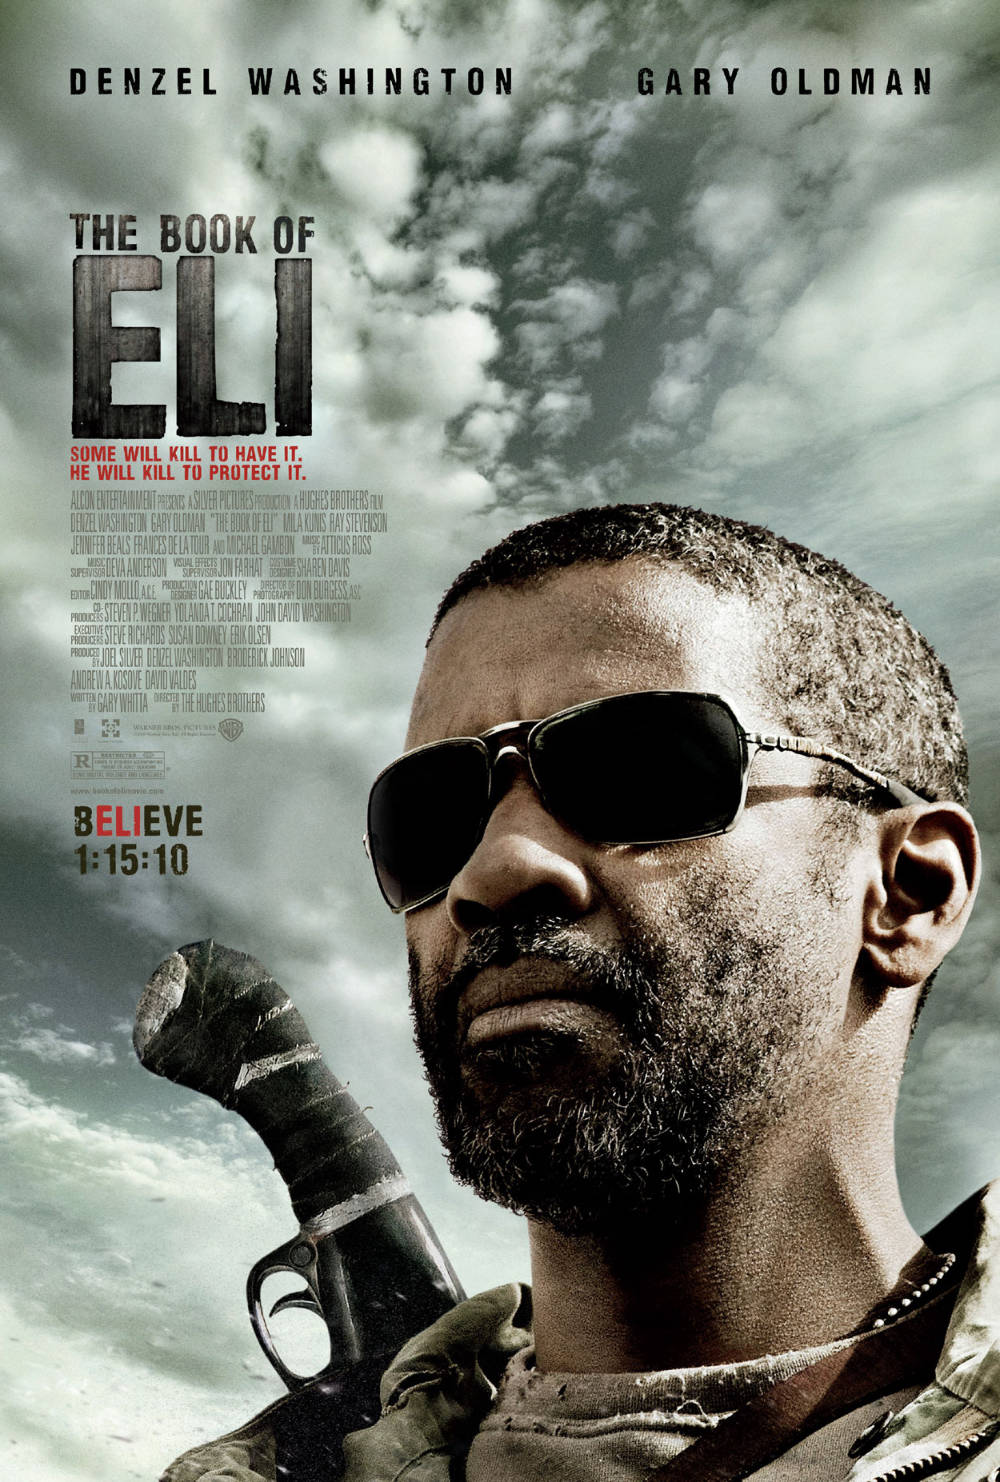 You are currently viewing Notes On A Film: The Book Of Eli